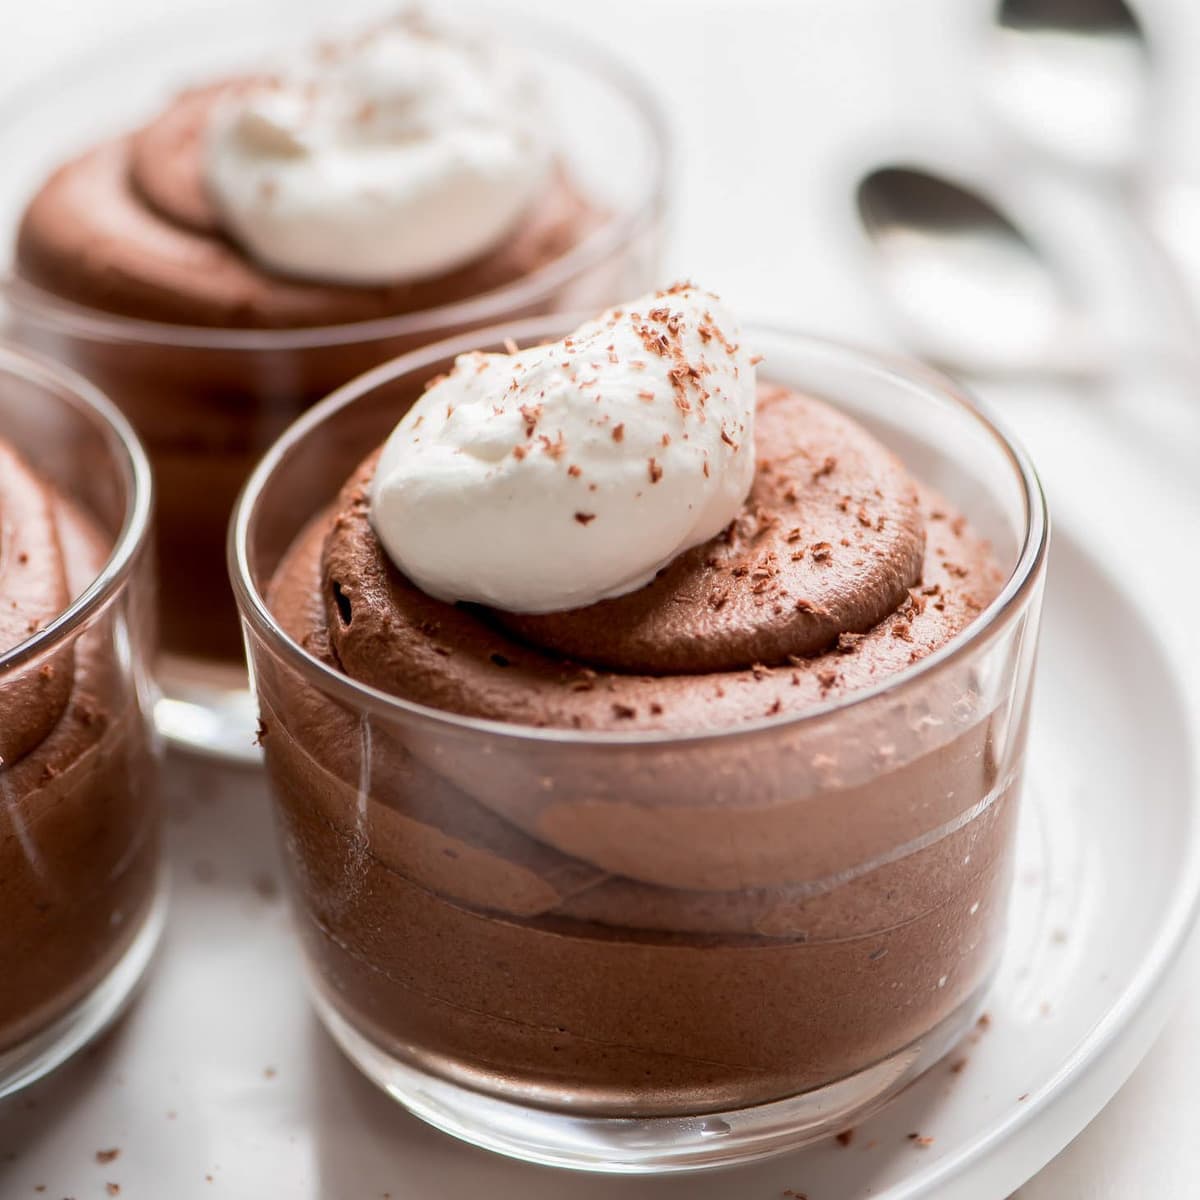 Thanksgiving desserts - a cup filled with chocolate mousse.